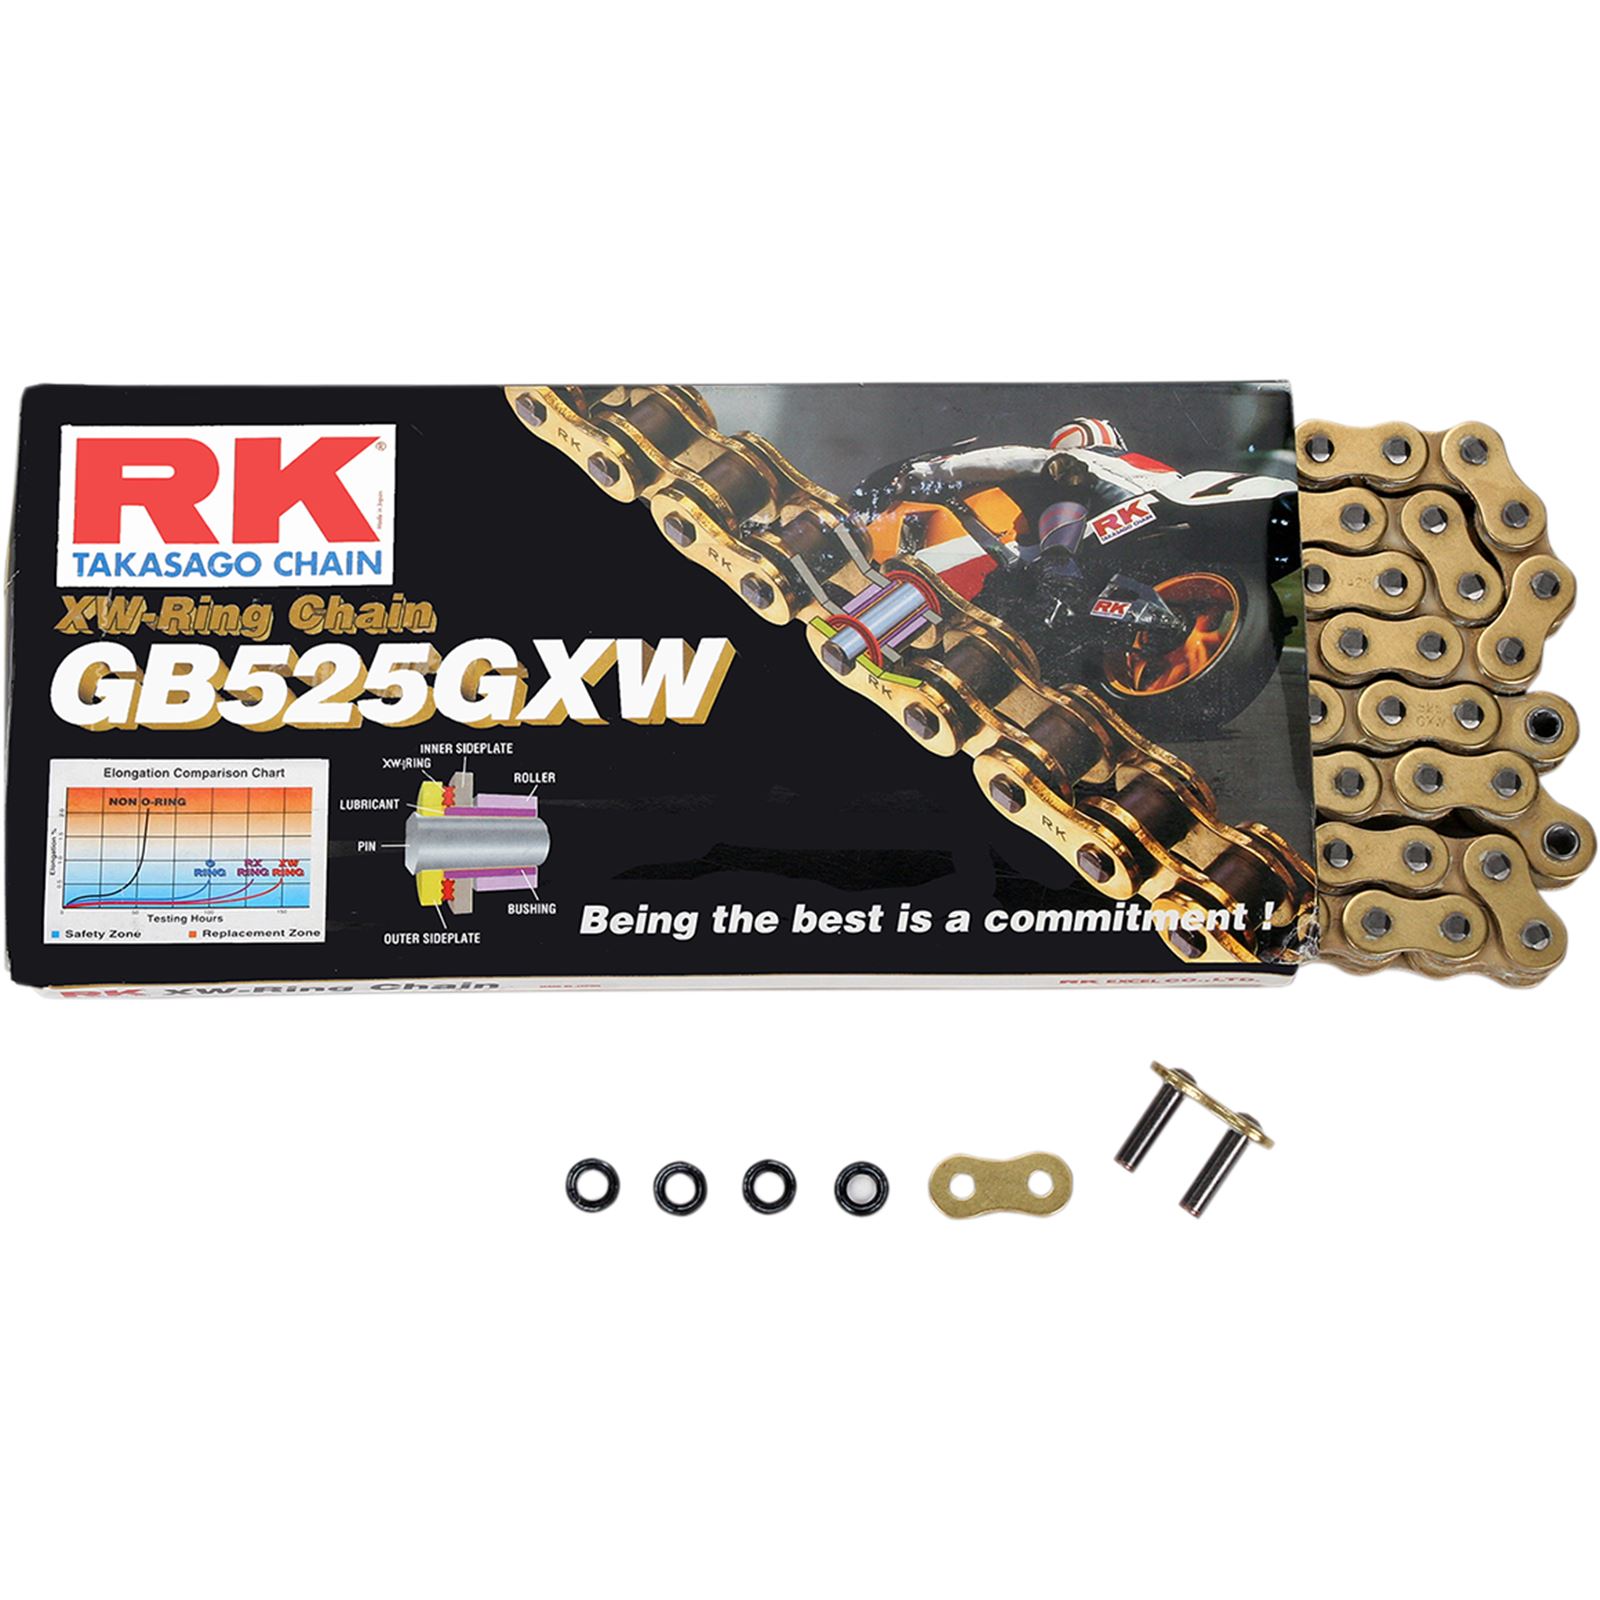 RK Excel GB 525 GXW - Chain - 120 Links